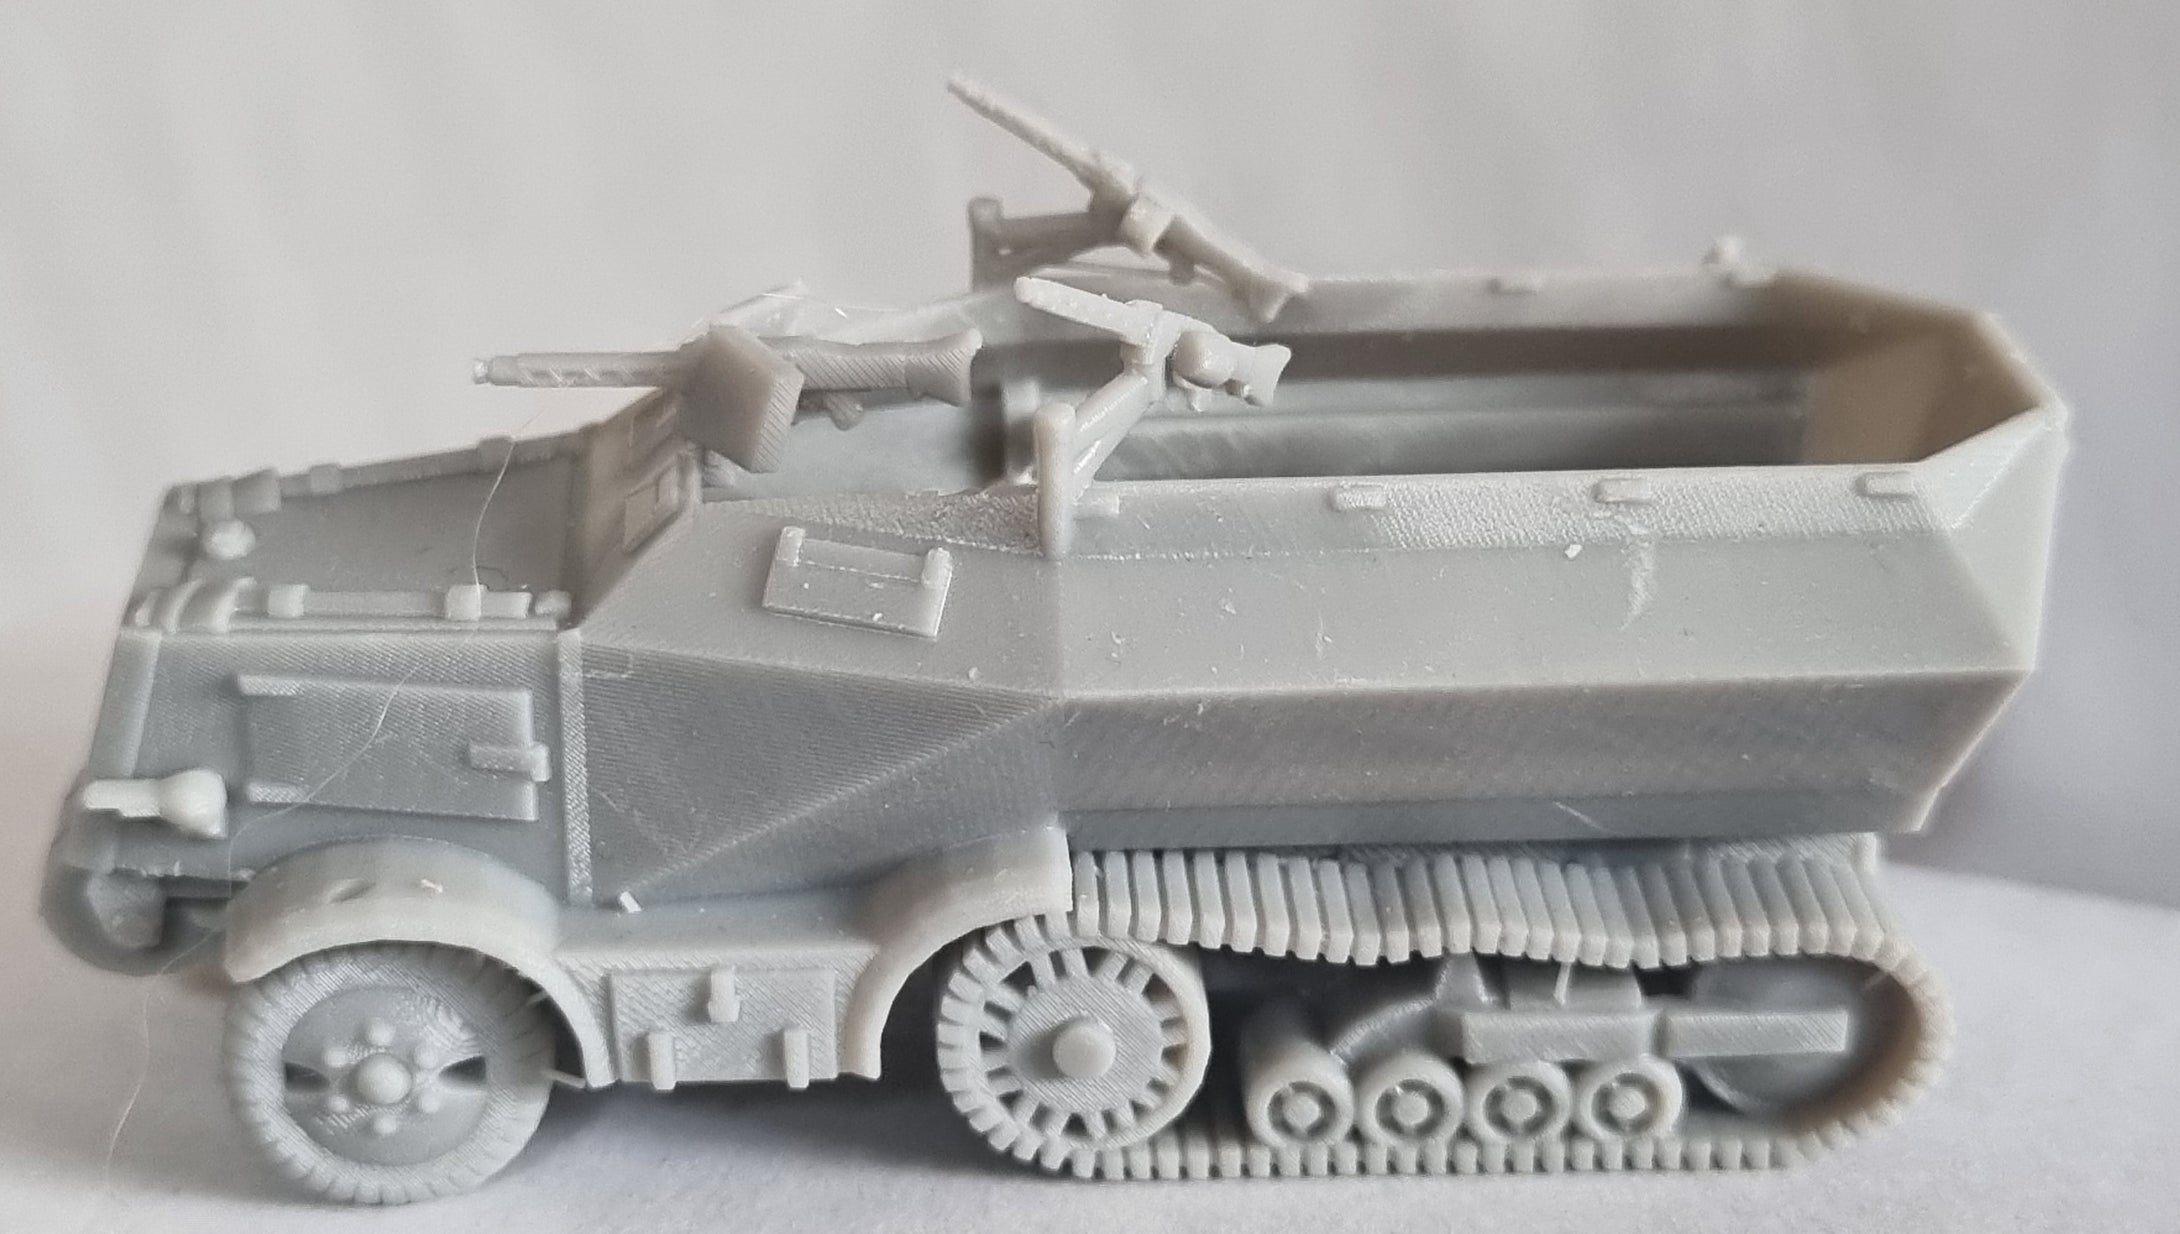 3D printed resin Unic Armoured half track